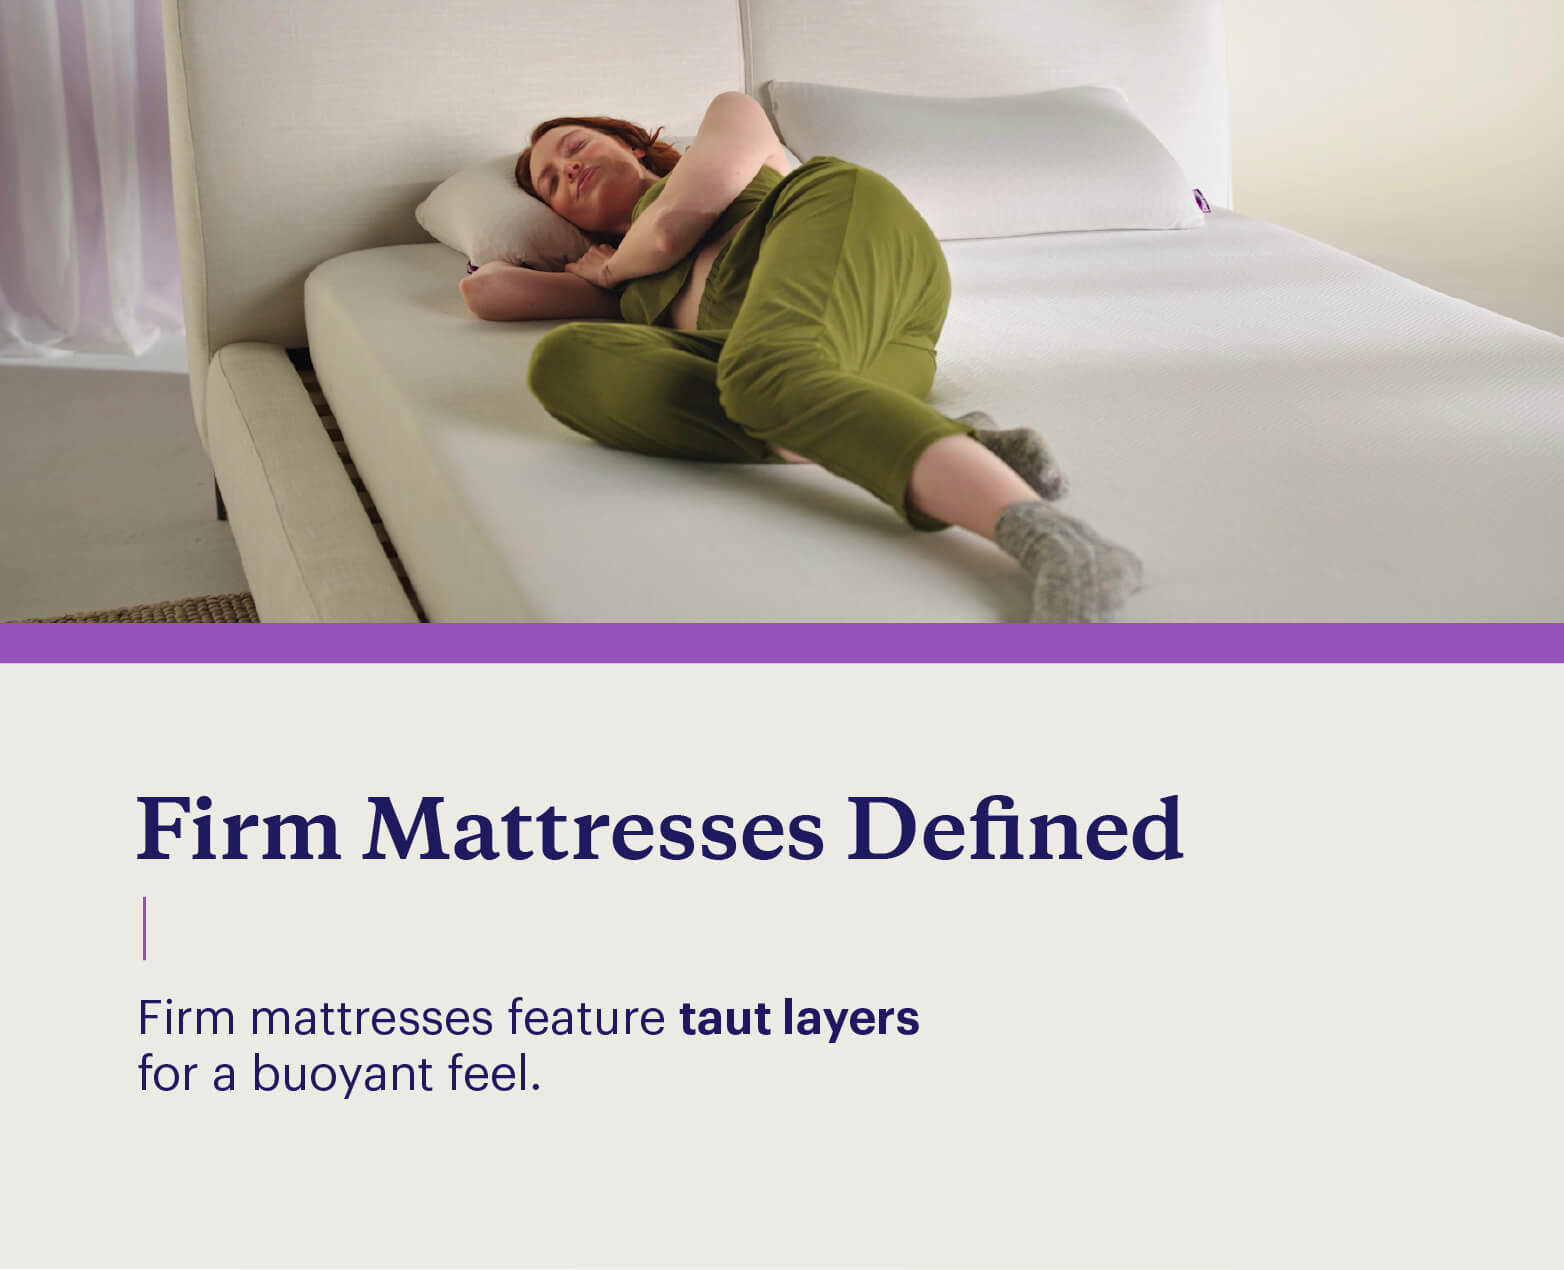 A graphic shows a woman laying on a firm mattress and defines what is a firm mattress.